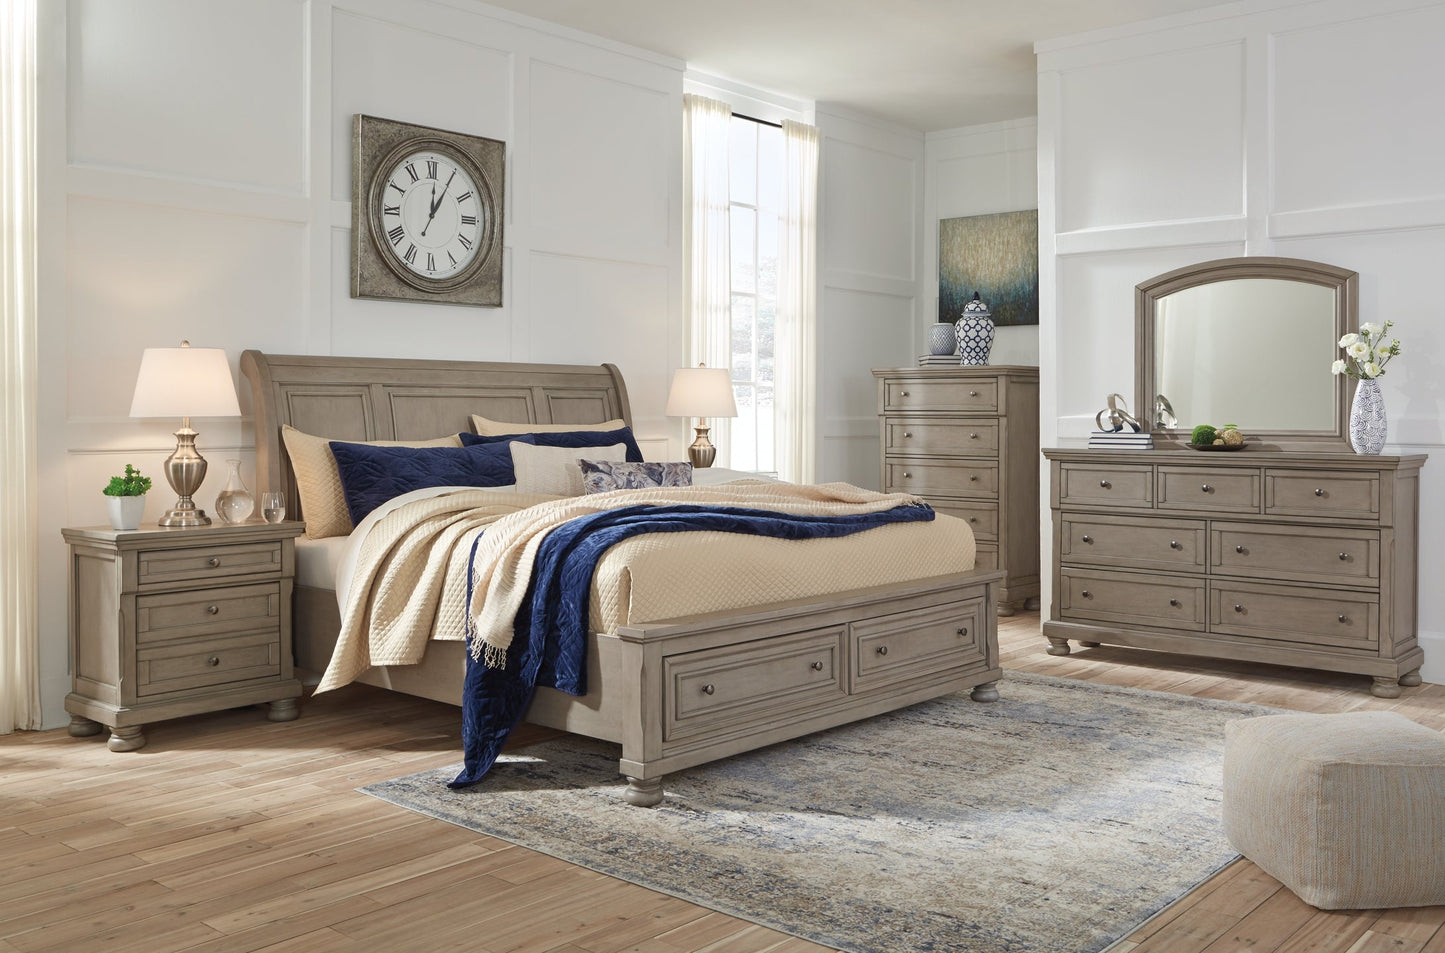 Lettner Queen Sleigh Bed with 2 Storage Drawers with Mirrored Dresser and 2 Nightstands at Walker Mattress and Furniture Locations in Cedar Park and Belton TX.